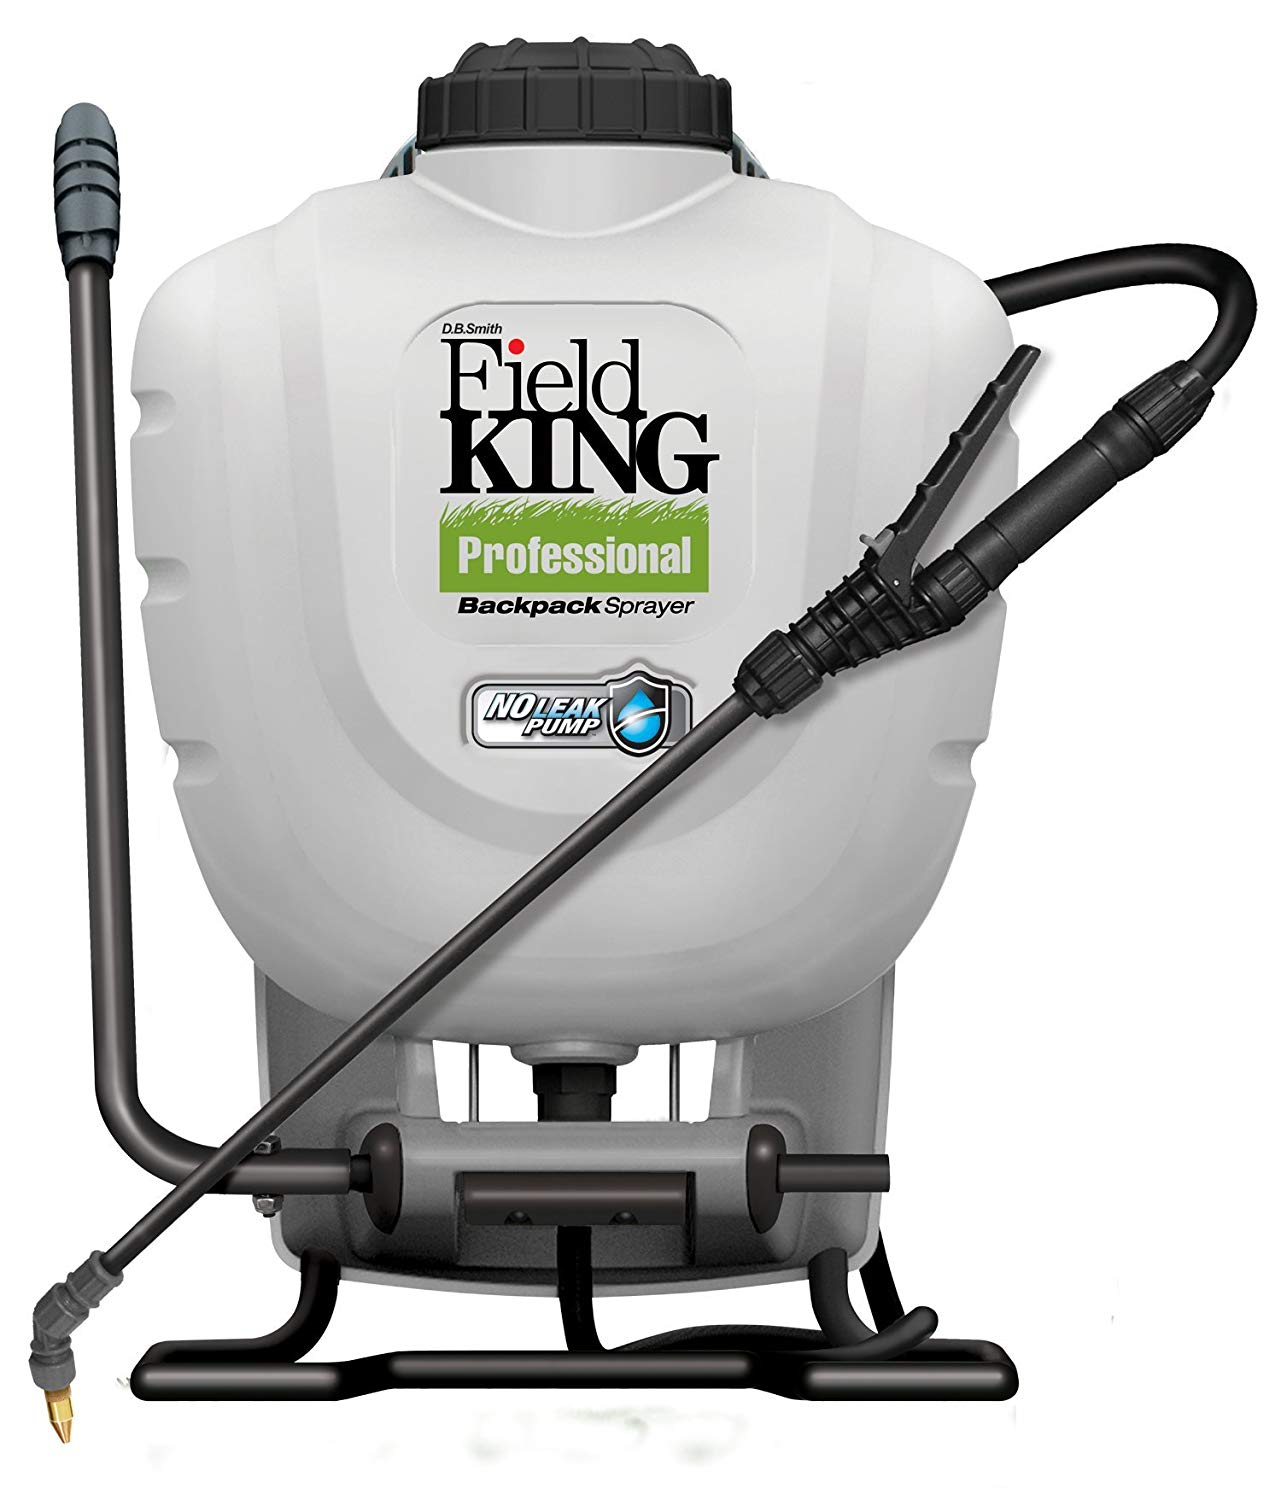 D.B Smith Field King Professional 190328 Backpack Sprayer